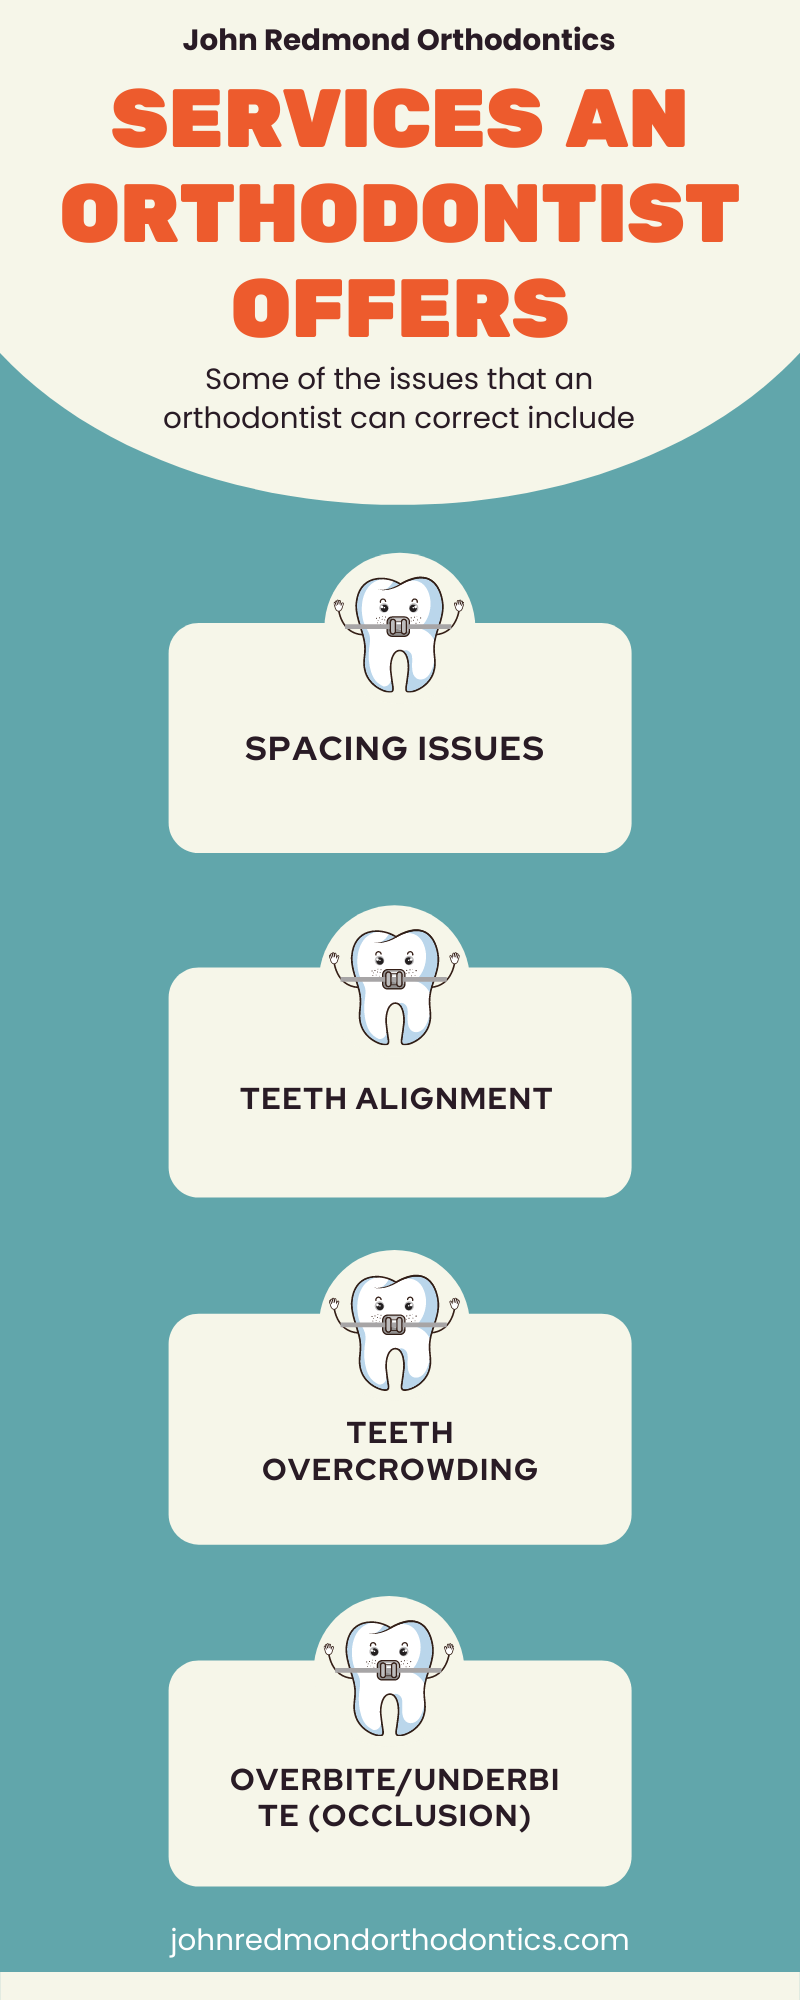 Services an orthodontist offers Infographic